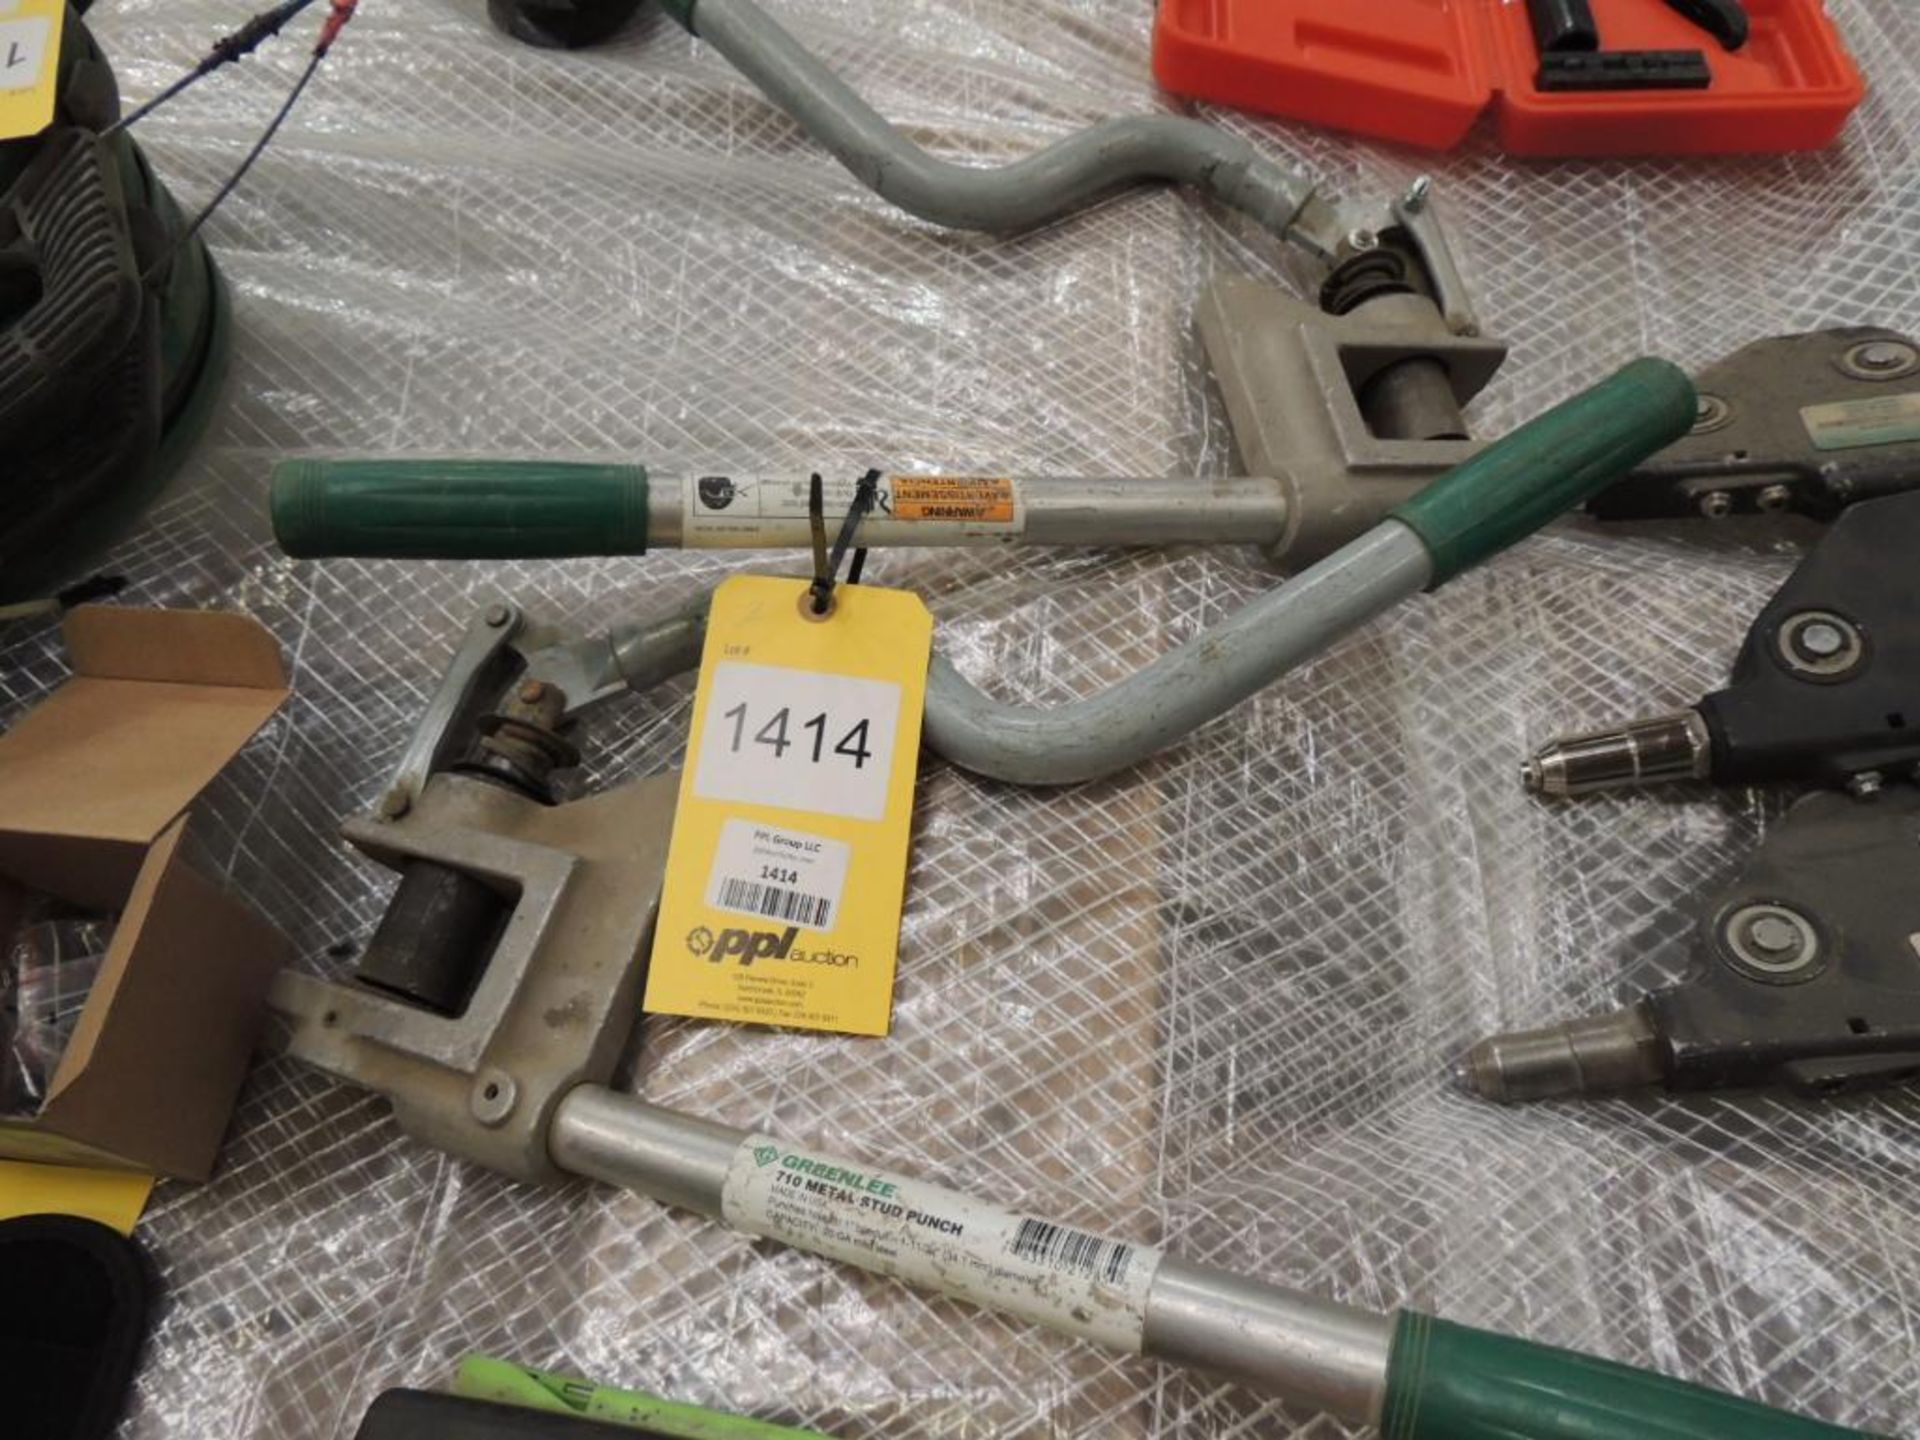 LOT: (2) Greenlee Stud Punches Model 710